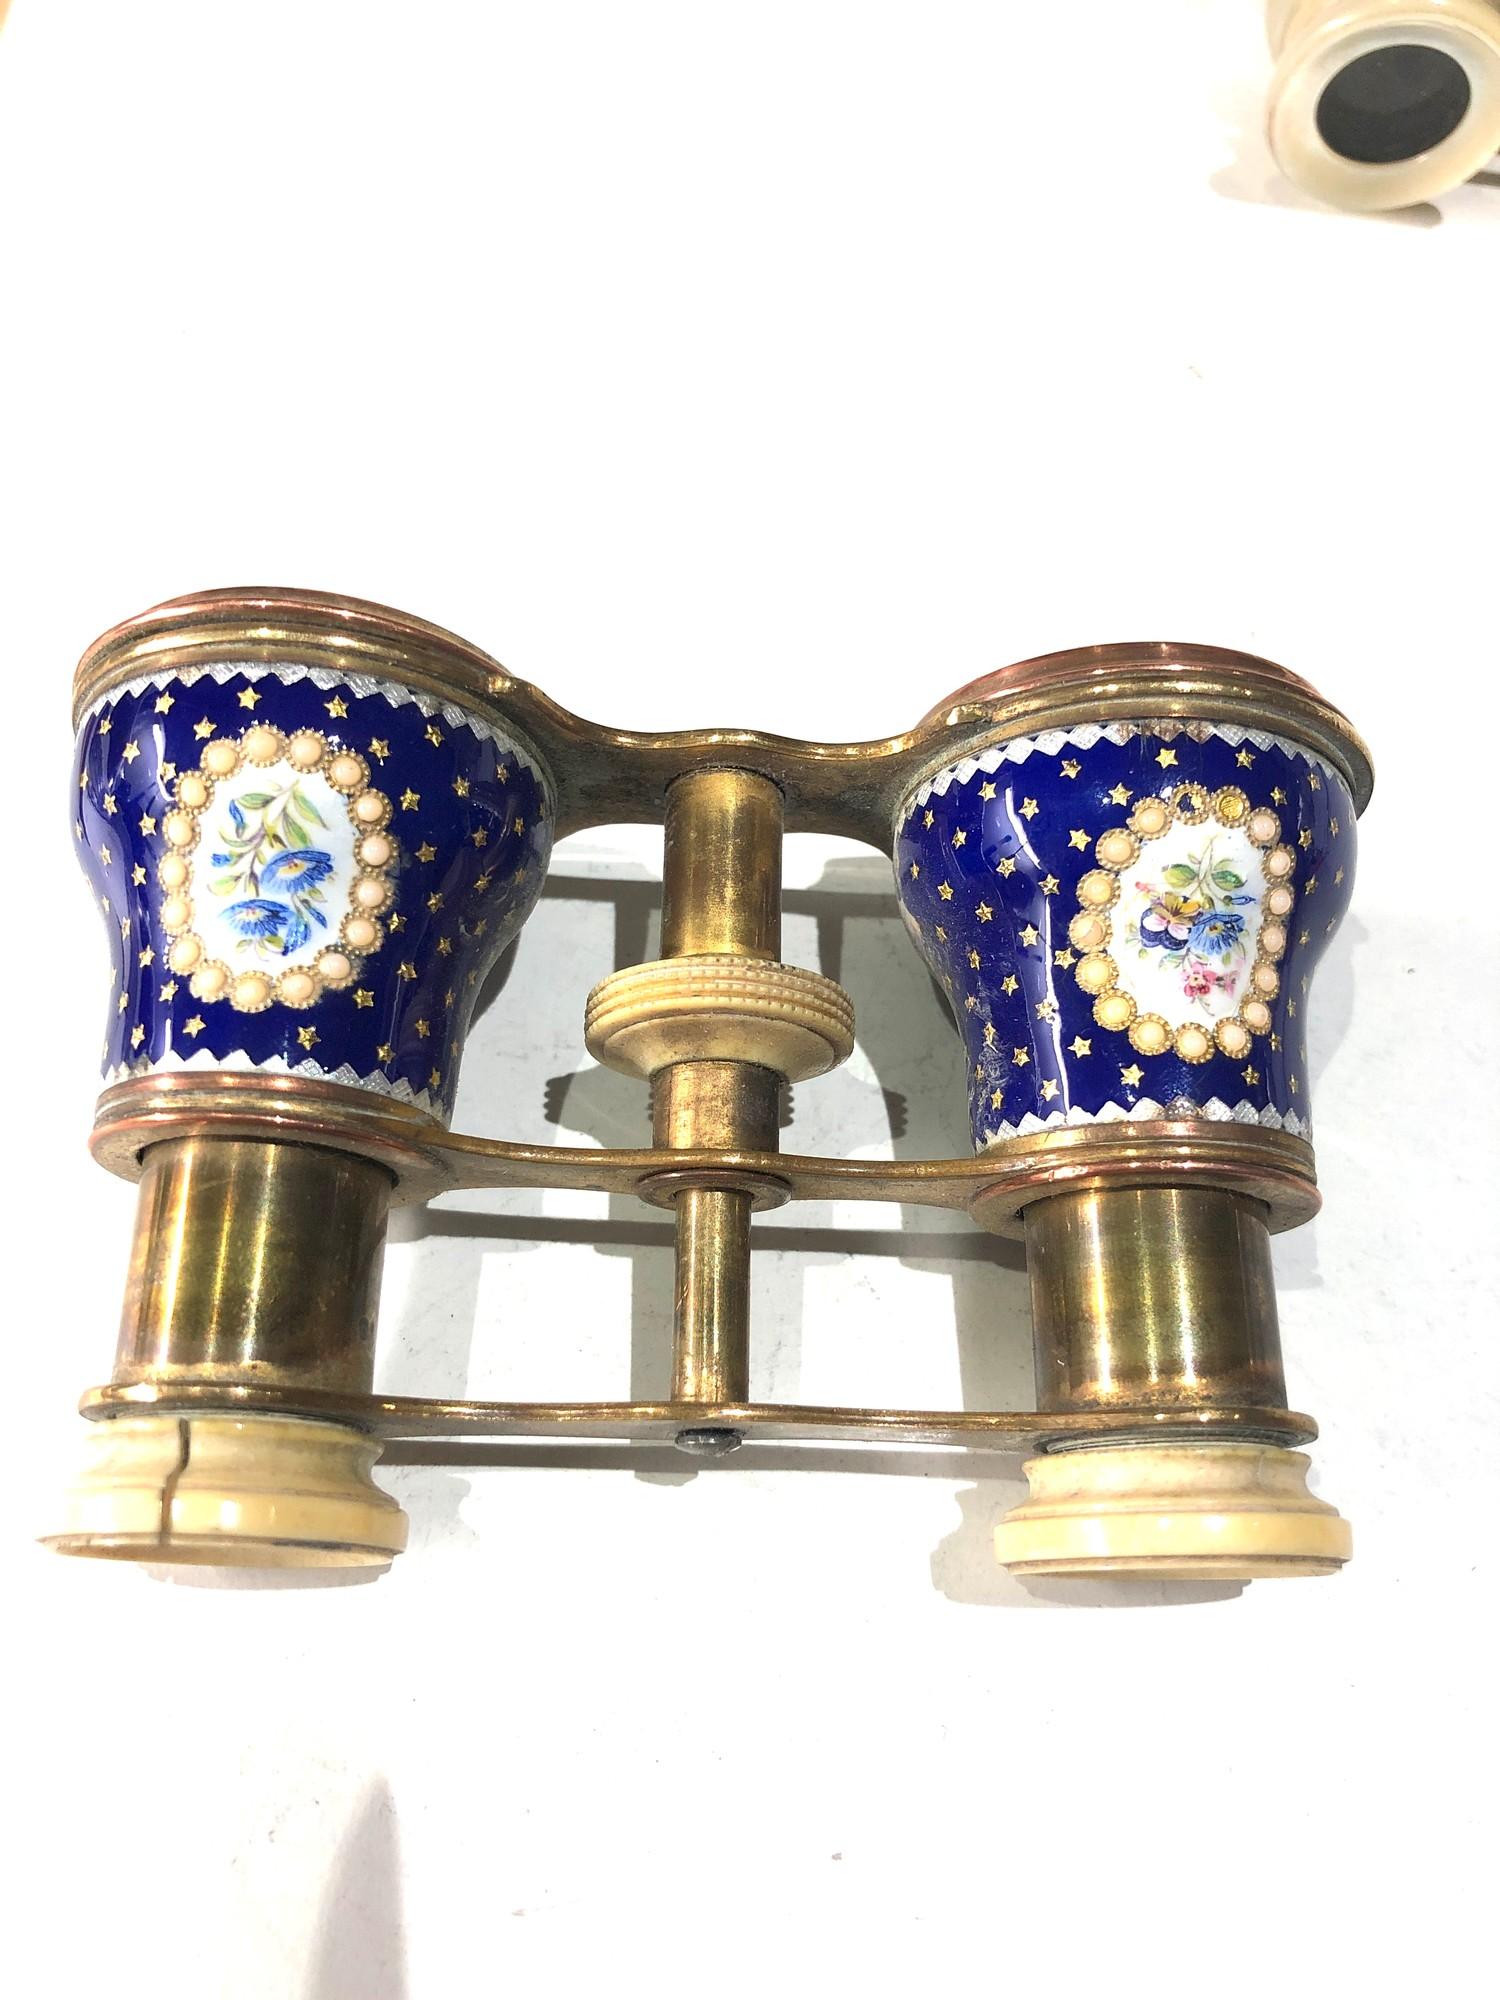 2 antique enamel opera glasses age related wear and damage as shown please see images for details as - Image 3 of 10